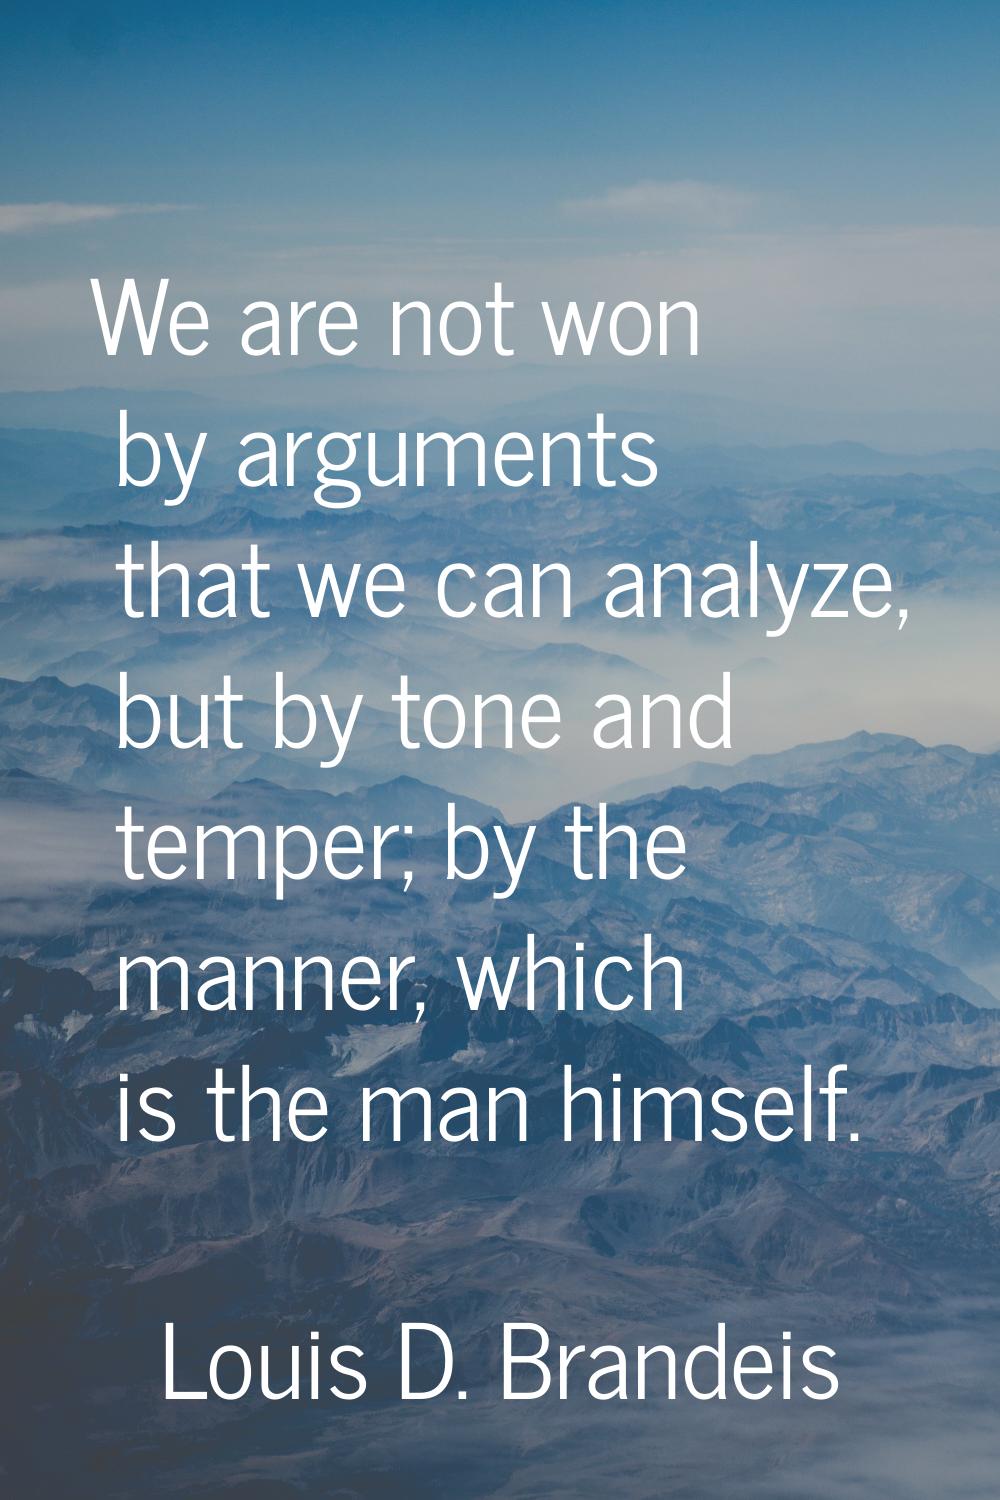 We are not won by arguments that we can analyze, but by tone and temper; by the manner, which is th